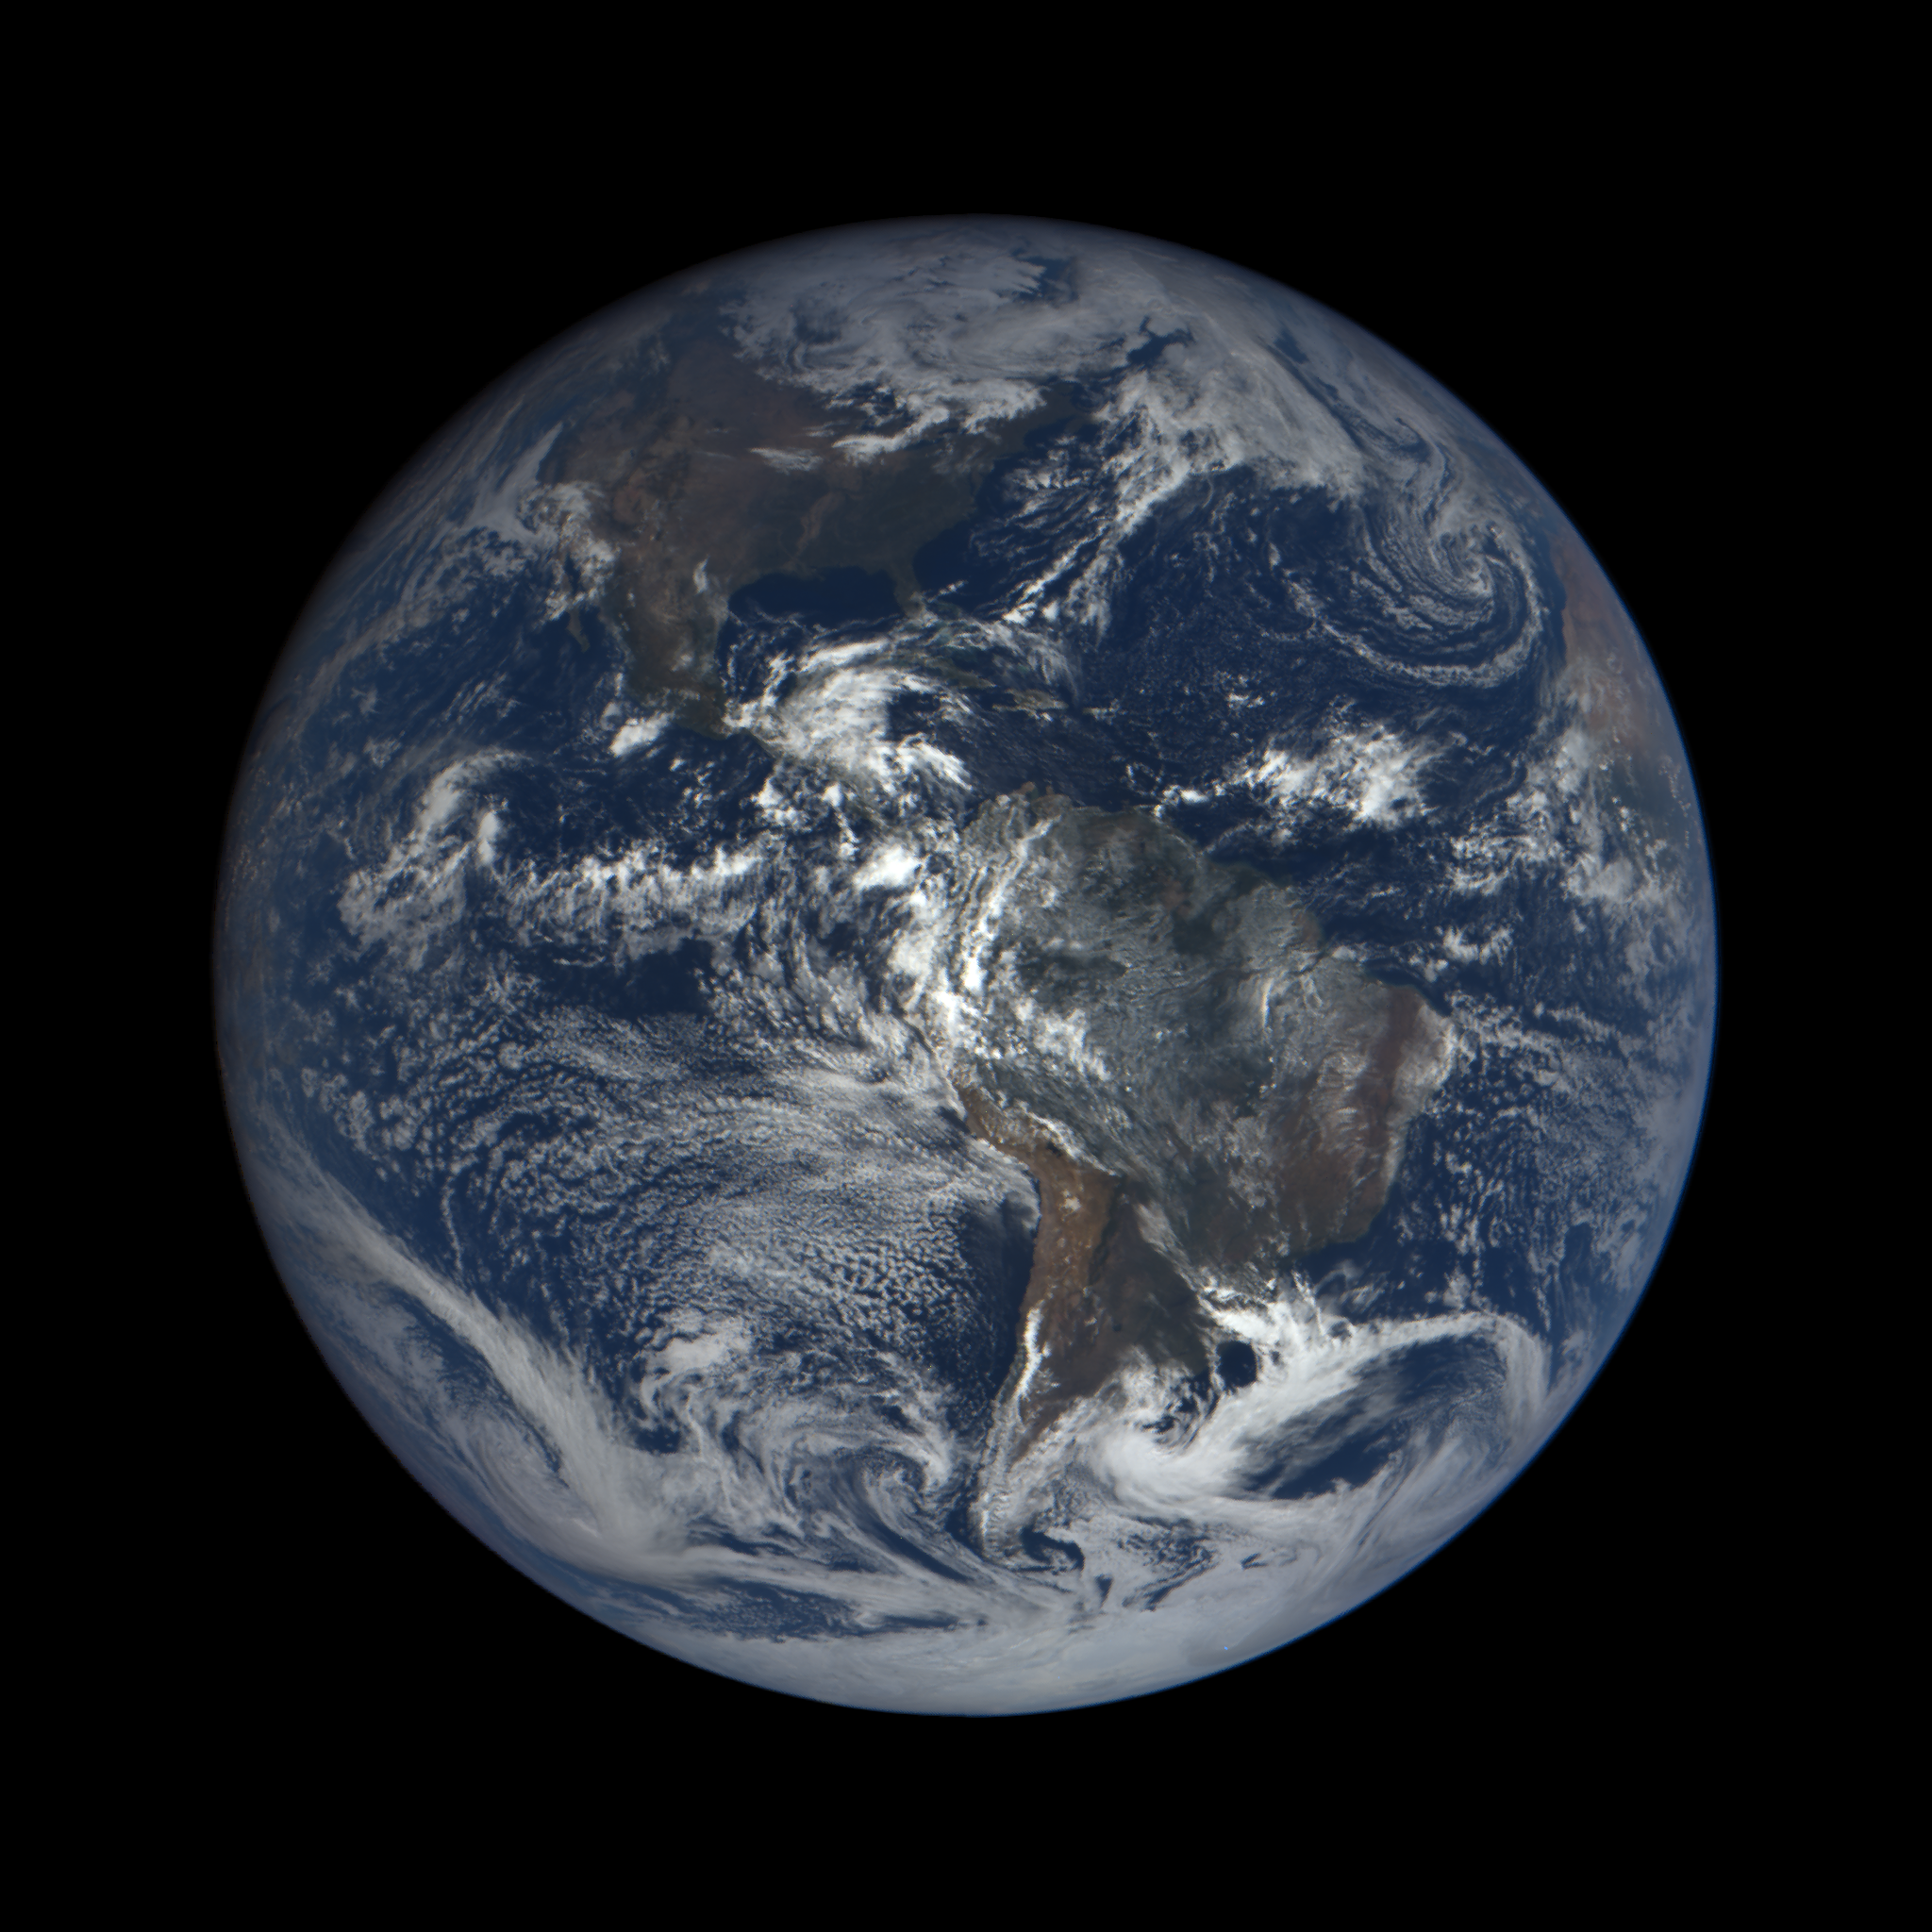 Americas, as captured by NASA's Earth Polychromatic Imaging Camera (EPIC) on the NASA/NOAA Deep Space Climate Observatory